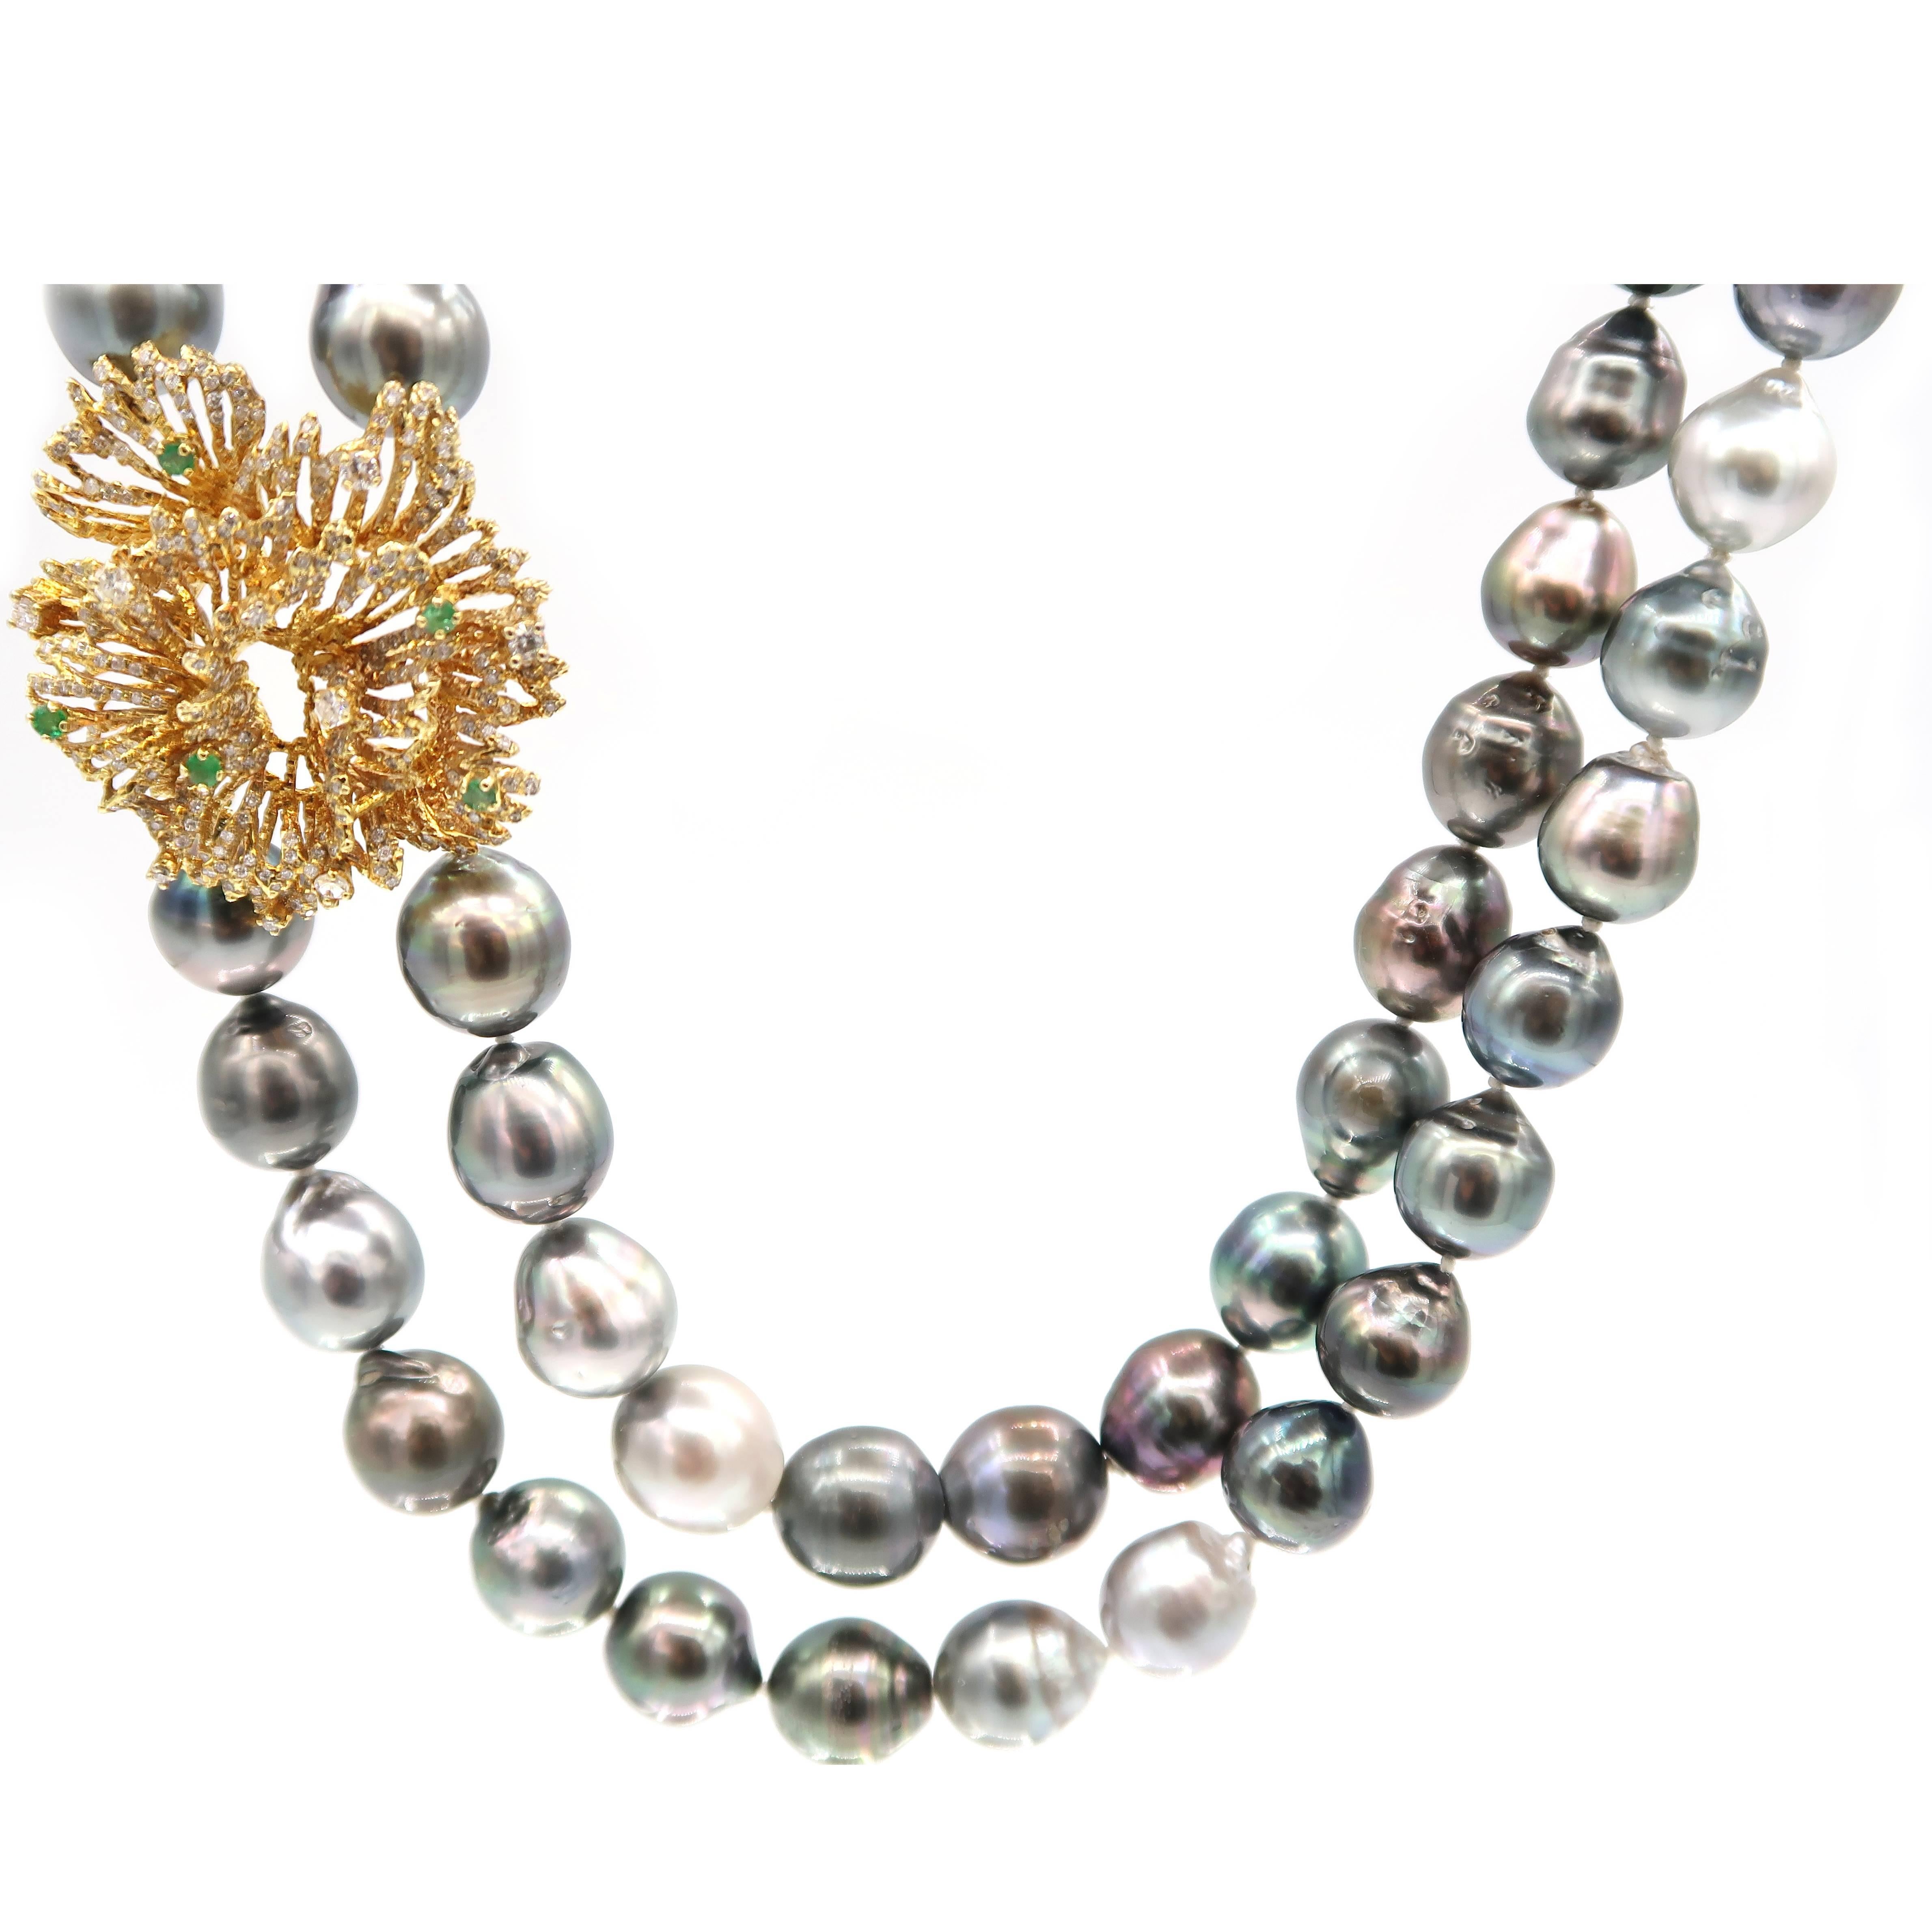 Shimmering diamond pendant with a spray of emerald complementing double-strand multicoloured natural Baroque Tahitian pearls. 

Gold: 18K Gold, 23.86 g
Diamond: 1.40 ct
Emerald: 0.40 ct

Inner Length: 21.25 inches
Outer Length: 23.25 inches